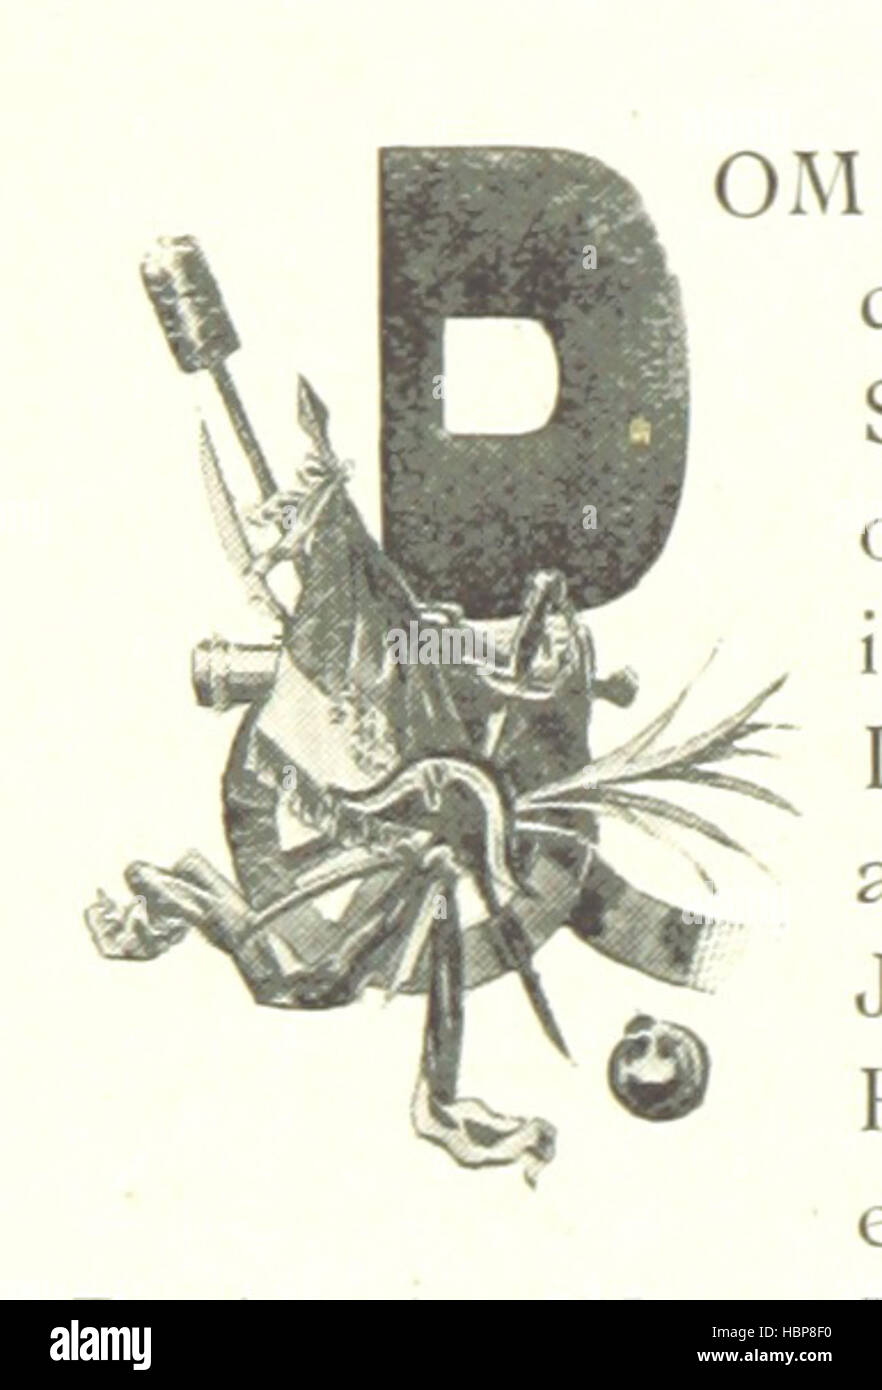 Image taken from page 322 of 'Oporto, Old and New. Being a historical record of the port wine trade, etc. [With illustrations.] Edited by H. E. Harper.)' Image taken from page 322 of 'Oporto, Old and New Stock Photo